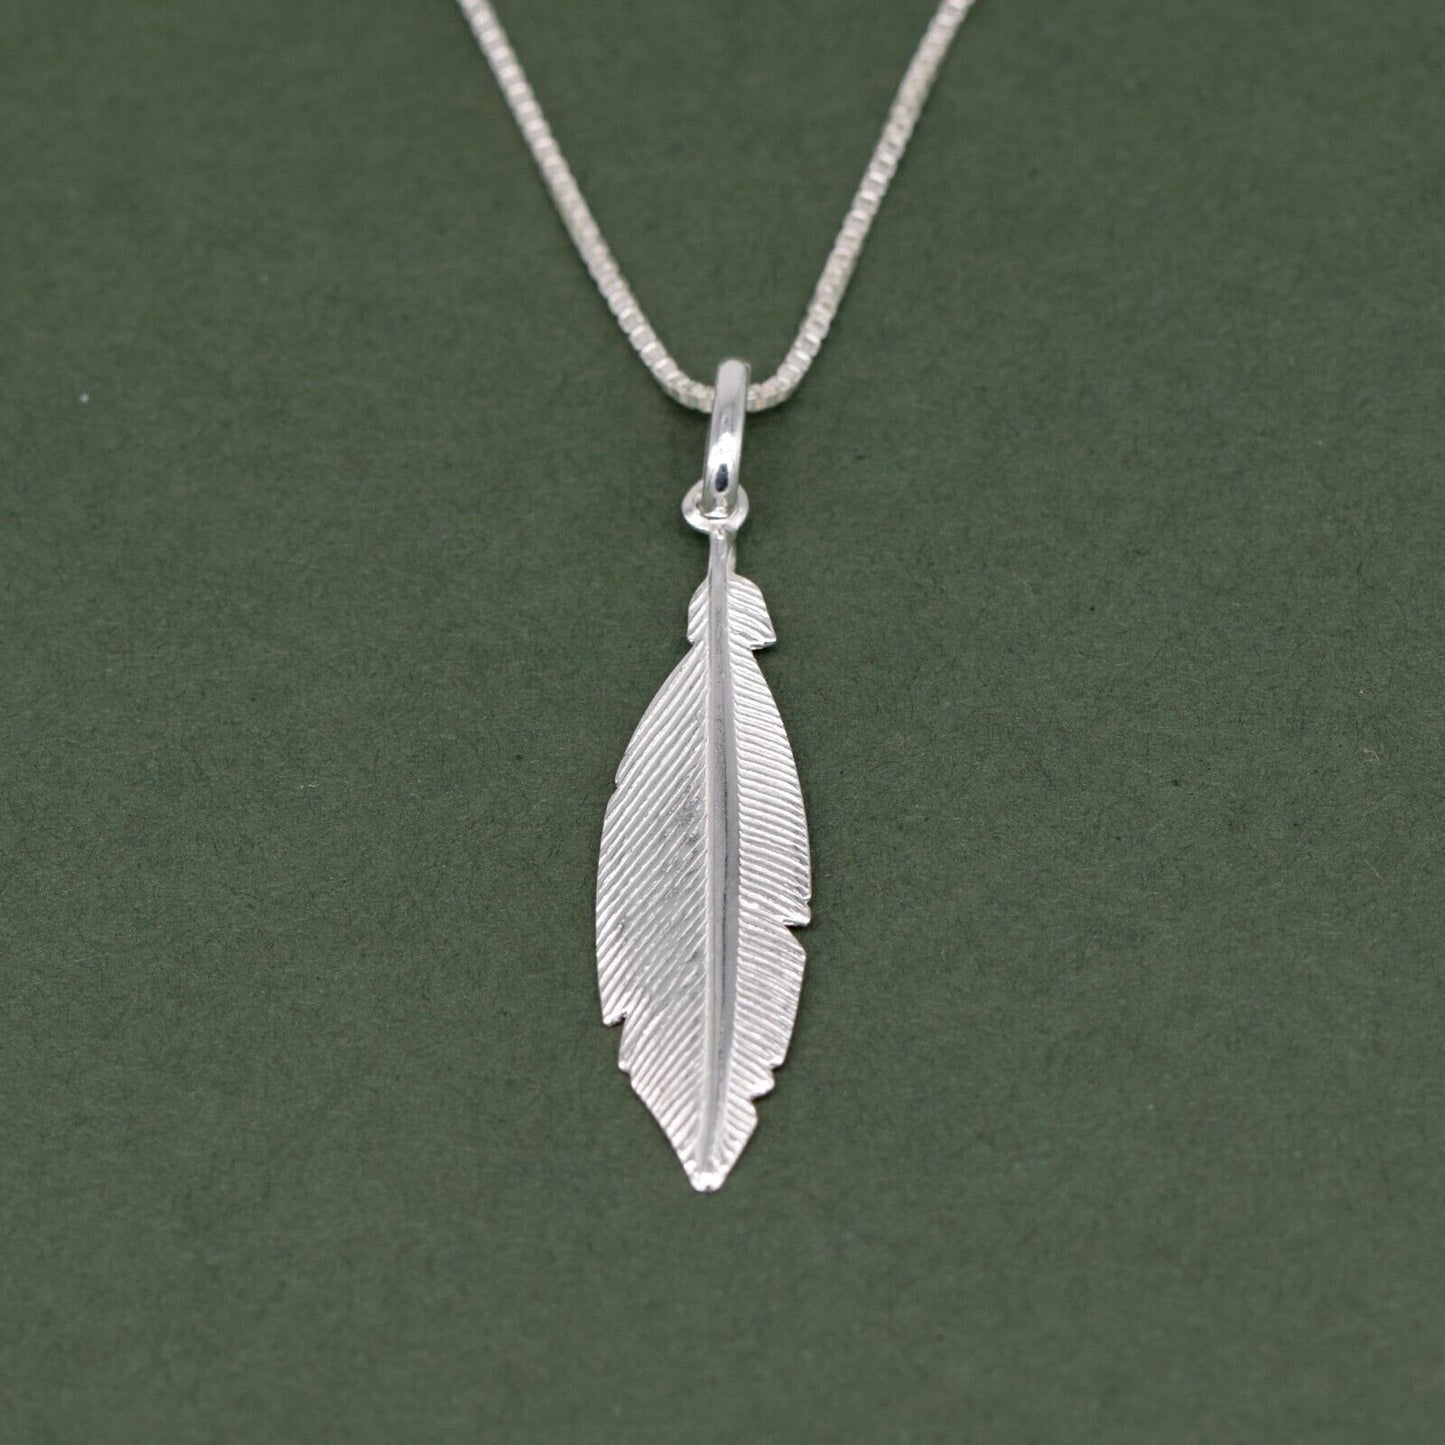 Genuine 925 Sterling Silver Feather Pendant Necklace on 14”-24" Box Chain